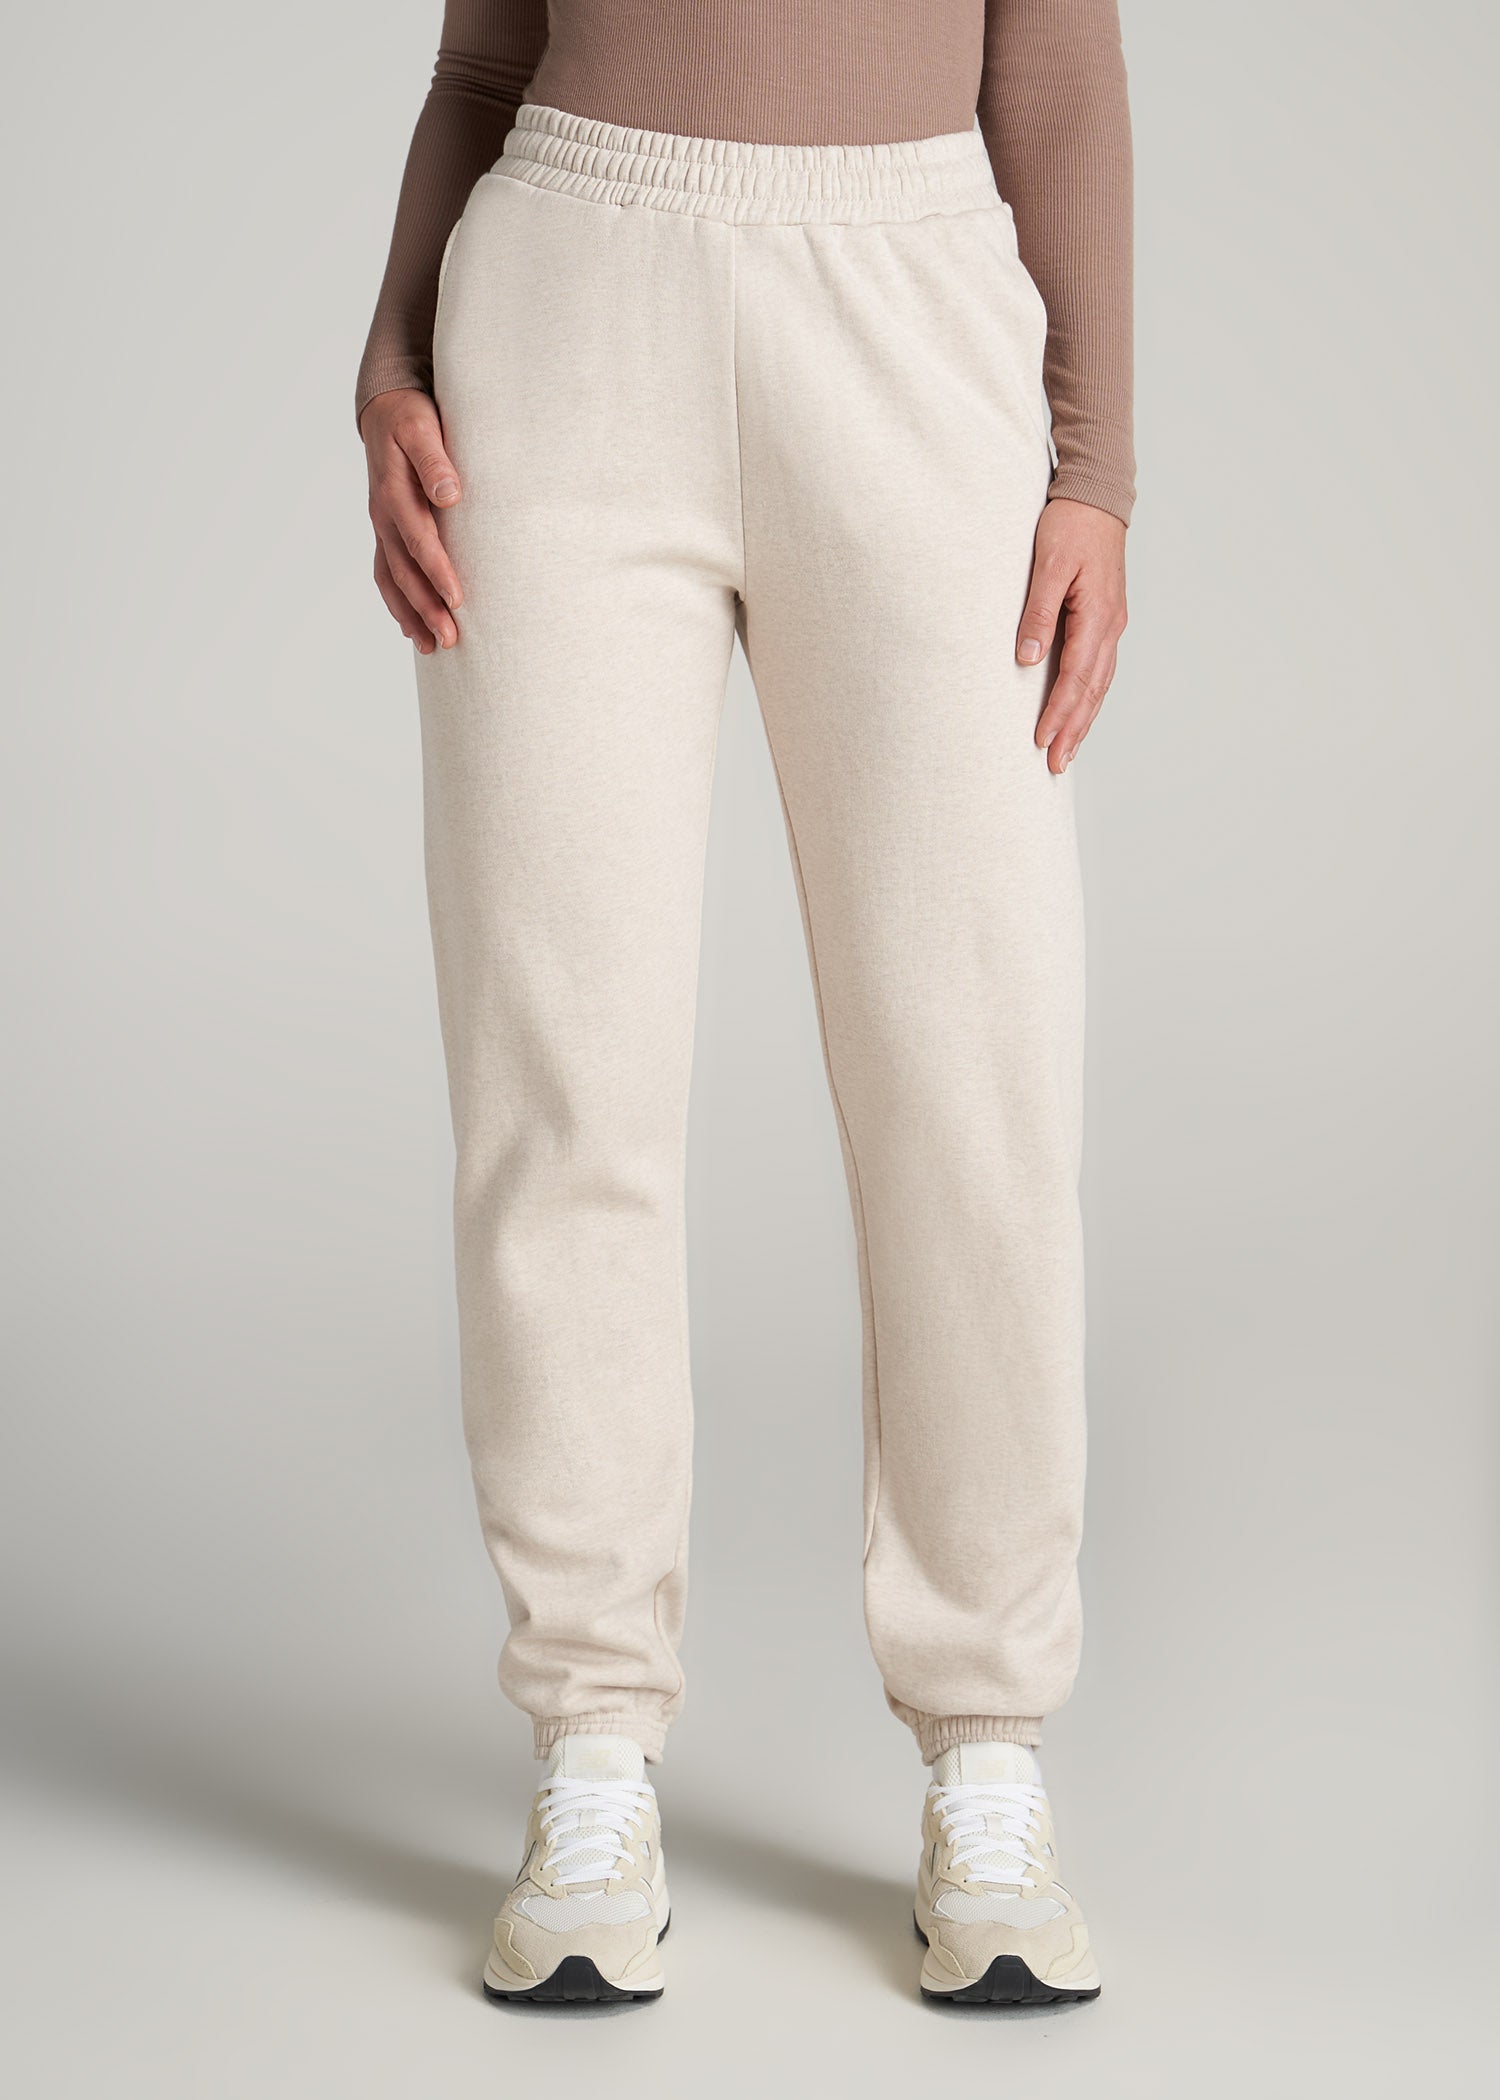 best sweat pants for tall girls (over 5'5)